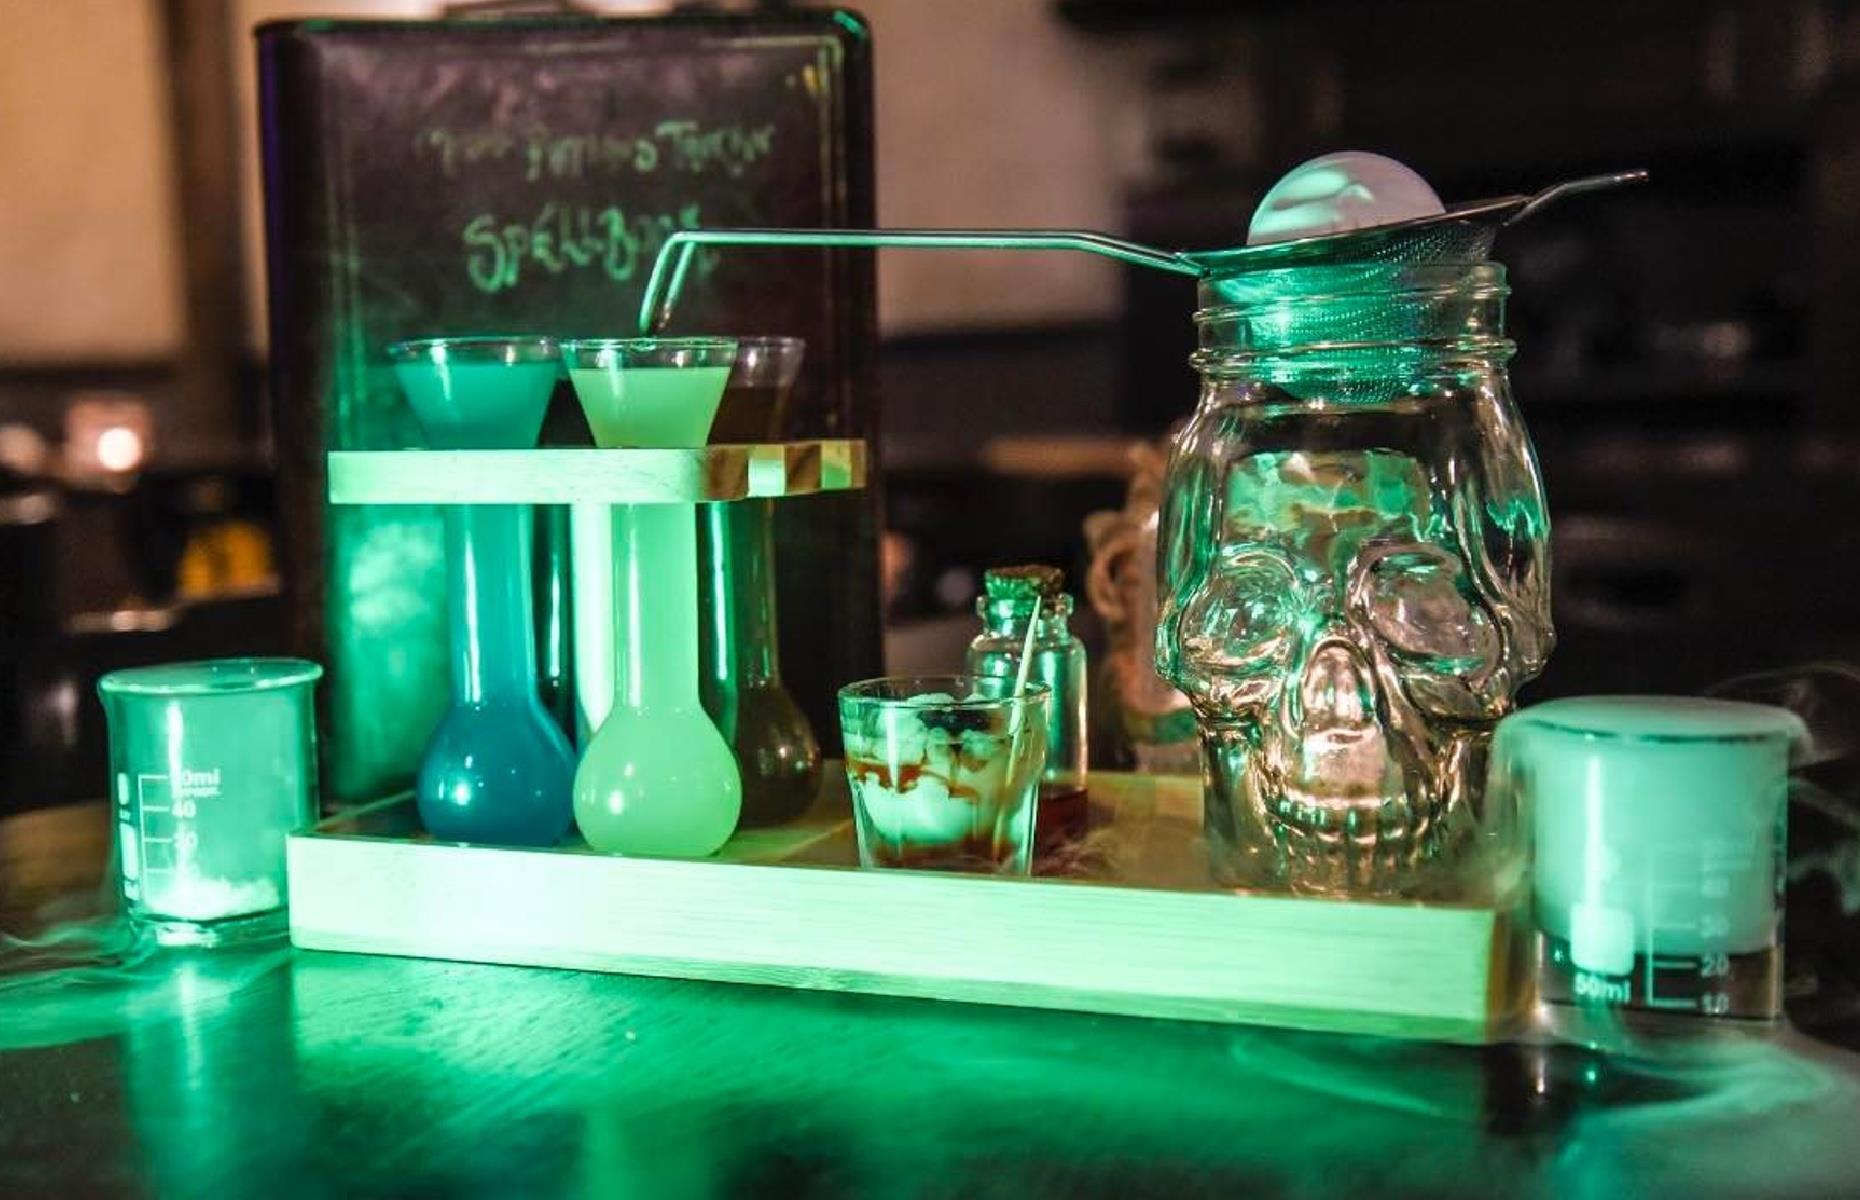 <p>The <a href="https://www.departmentofmagic.com/">Department Of Magic</a> in Edinburgh, Scotland is the place to go for a truly Potter-esque experience. Head to the Magic Potions Tavern and order The Dark Lord, a beguiling mix of dark rum, Malibu, Curacao and pineapple juice (with juicy brains and bone fragments). There's also cocktail making classes and an escape room on offer here.</p>